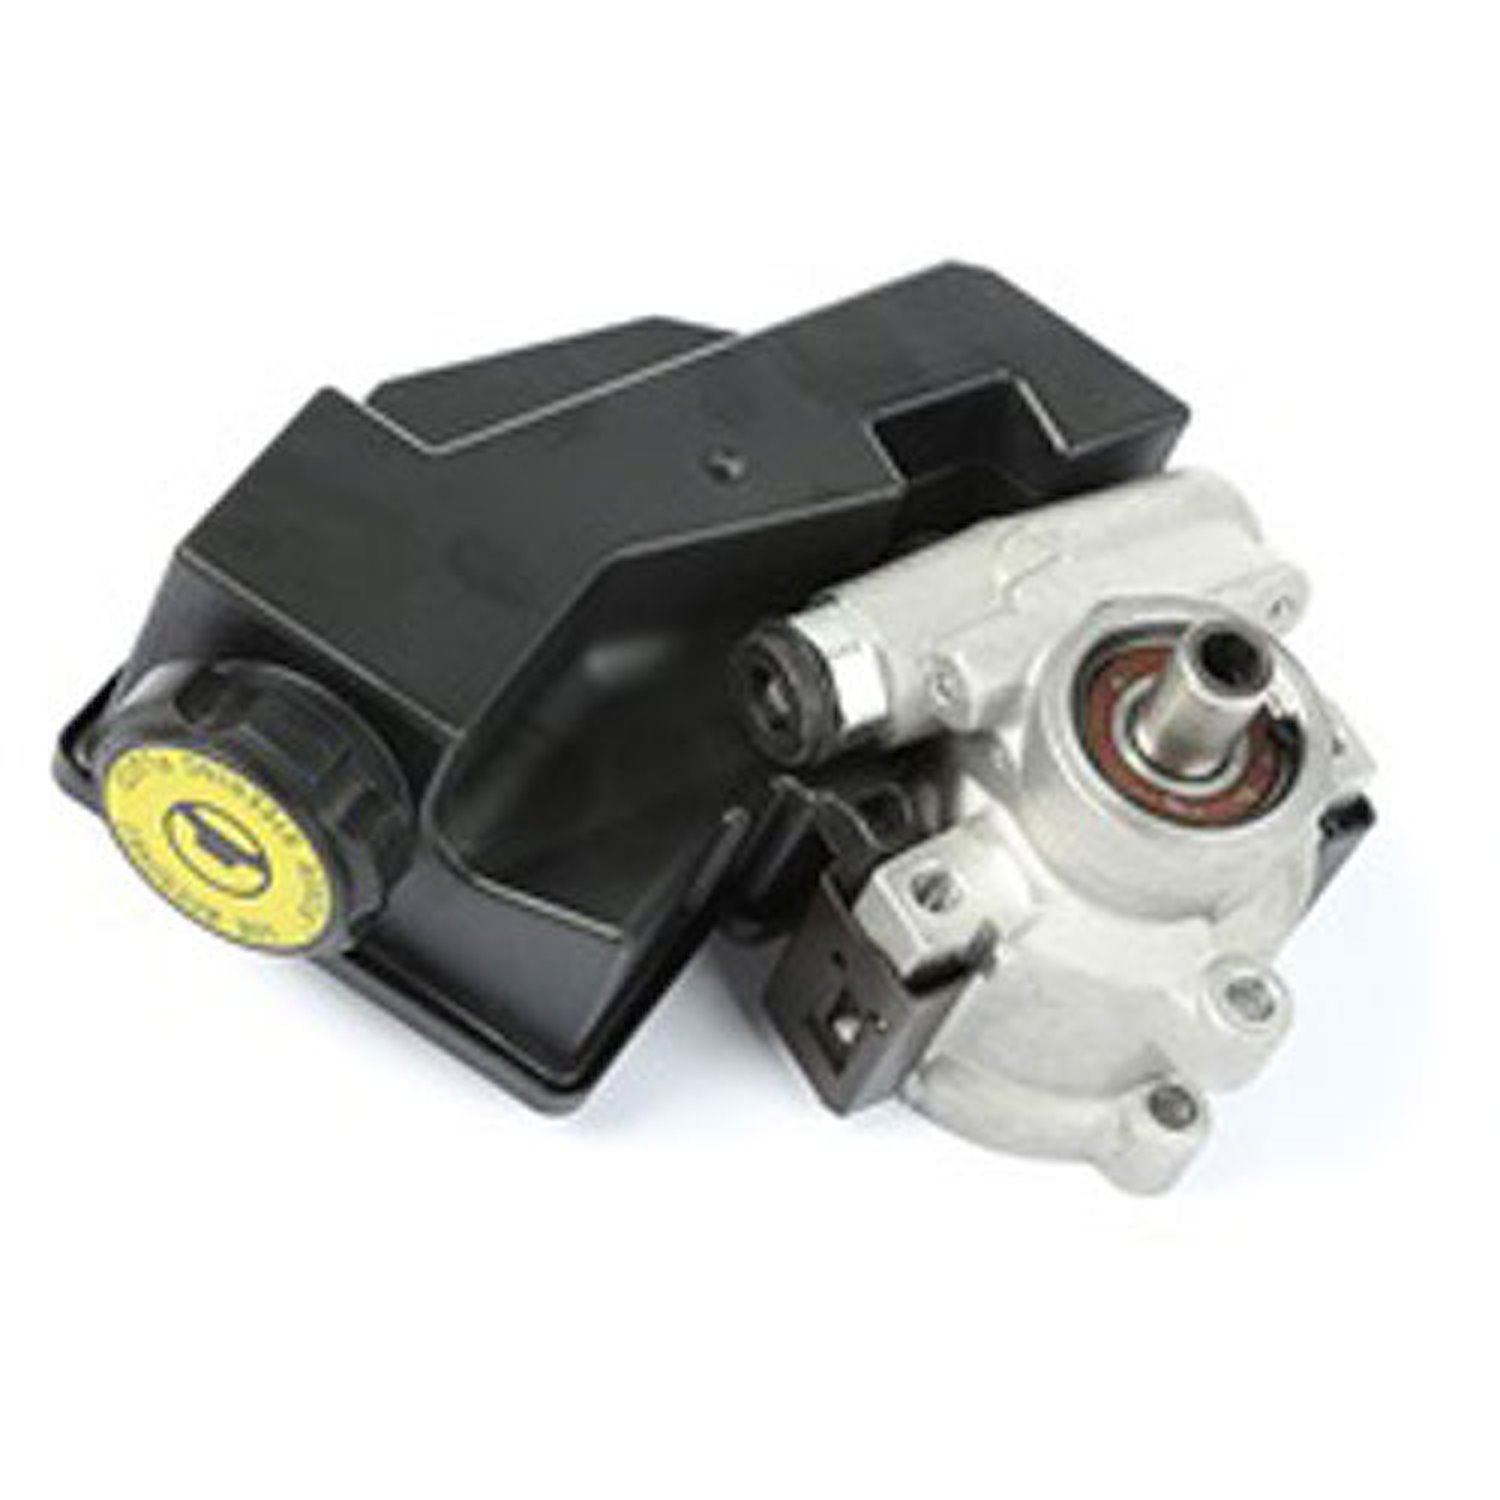 This power steering pump from Omix-ADA fits 99-04 Jeep Grand Cherokees with a 4.0L engine and 99-01